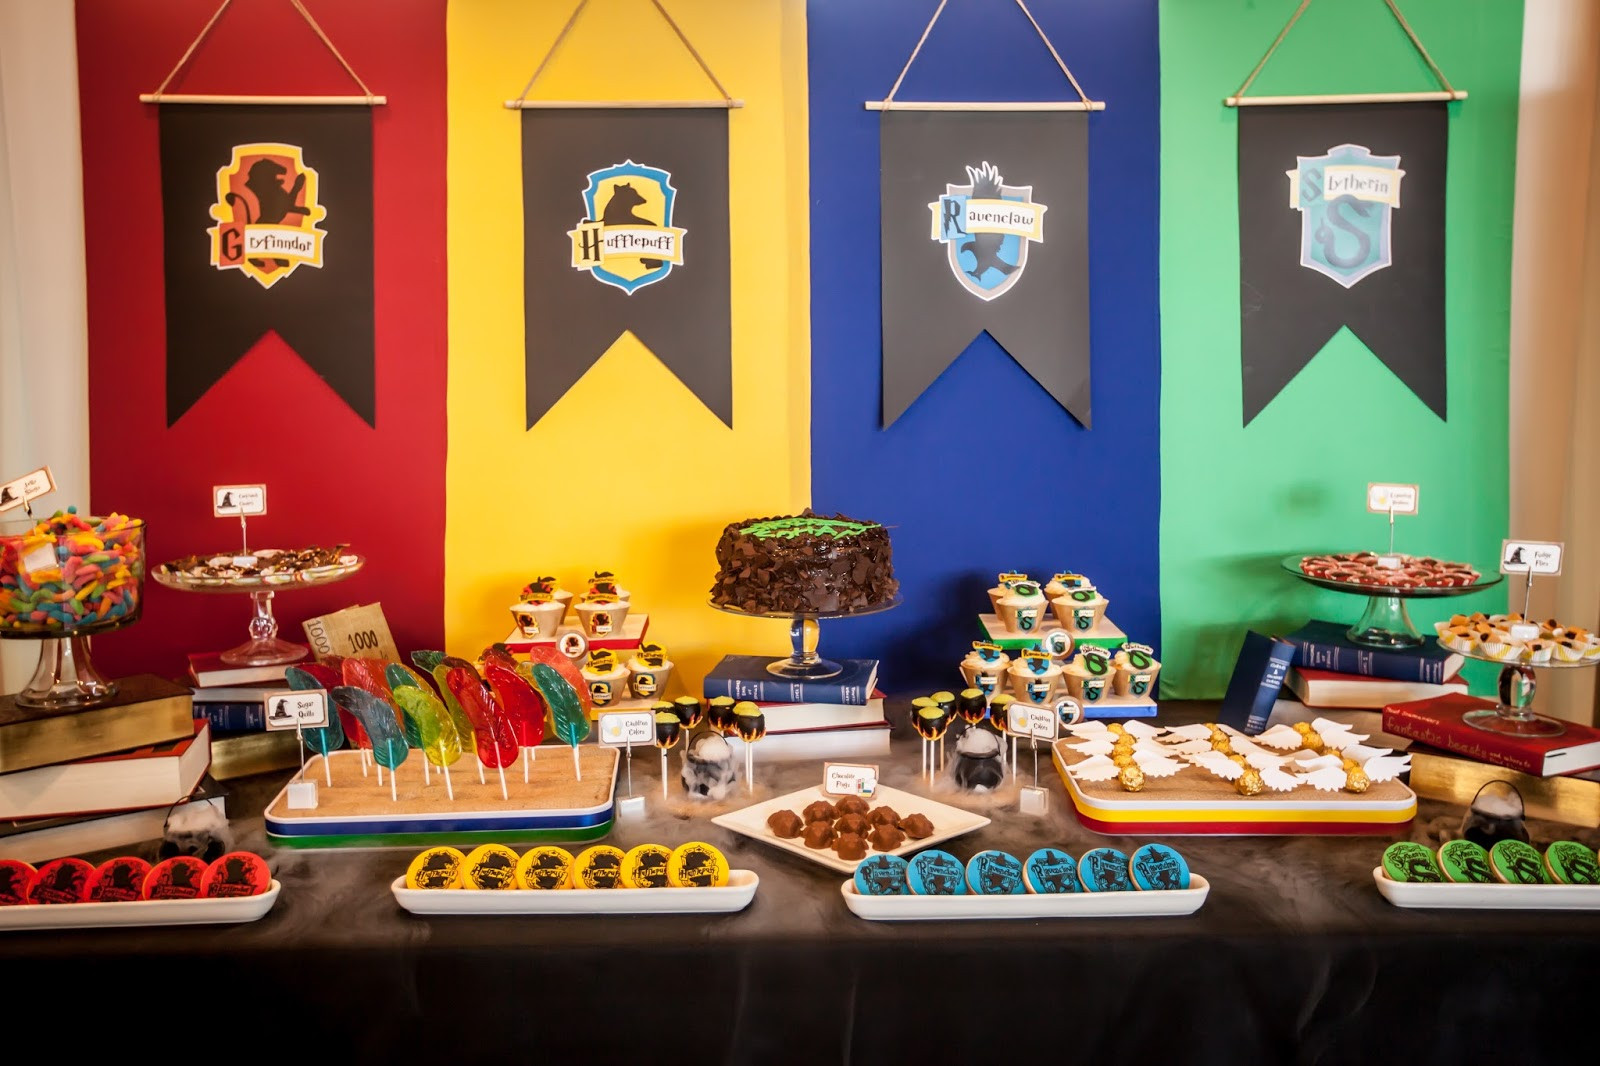 Harry Potter Birthday Decorations
 The Party Wall Harry Potter inspired party Part 1